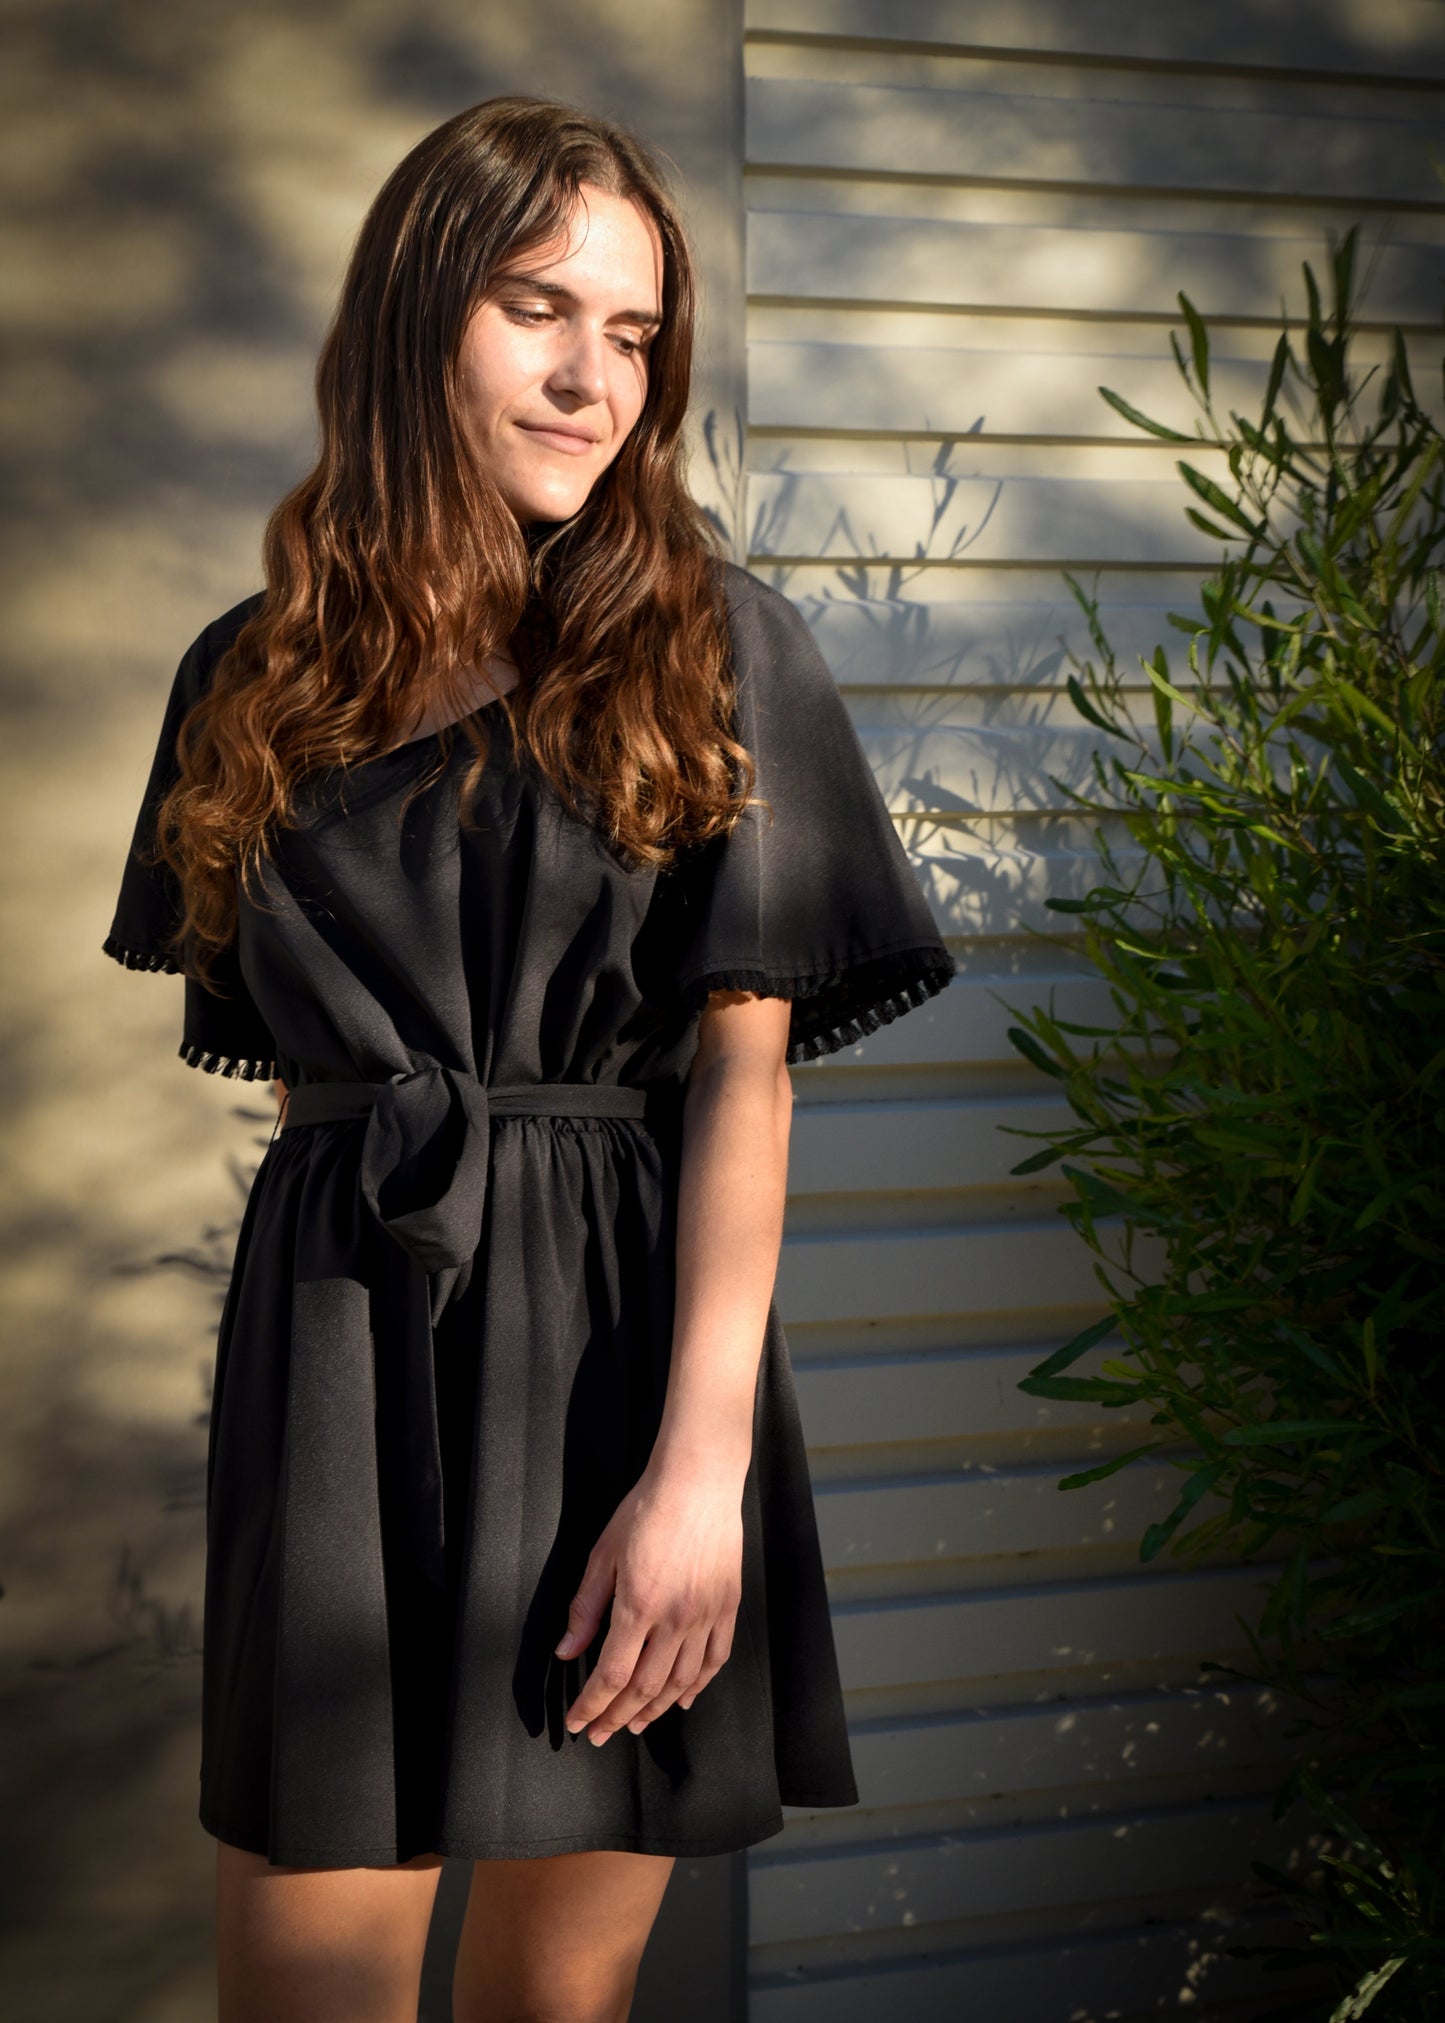 Young women wearing Young USA Casual Spring Romper with front tie in Black color.